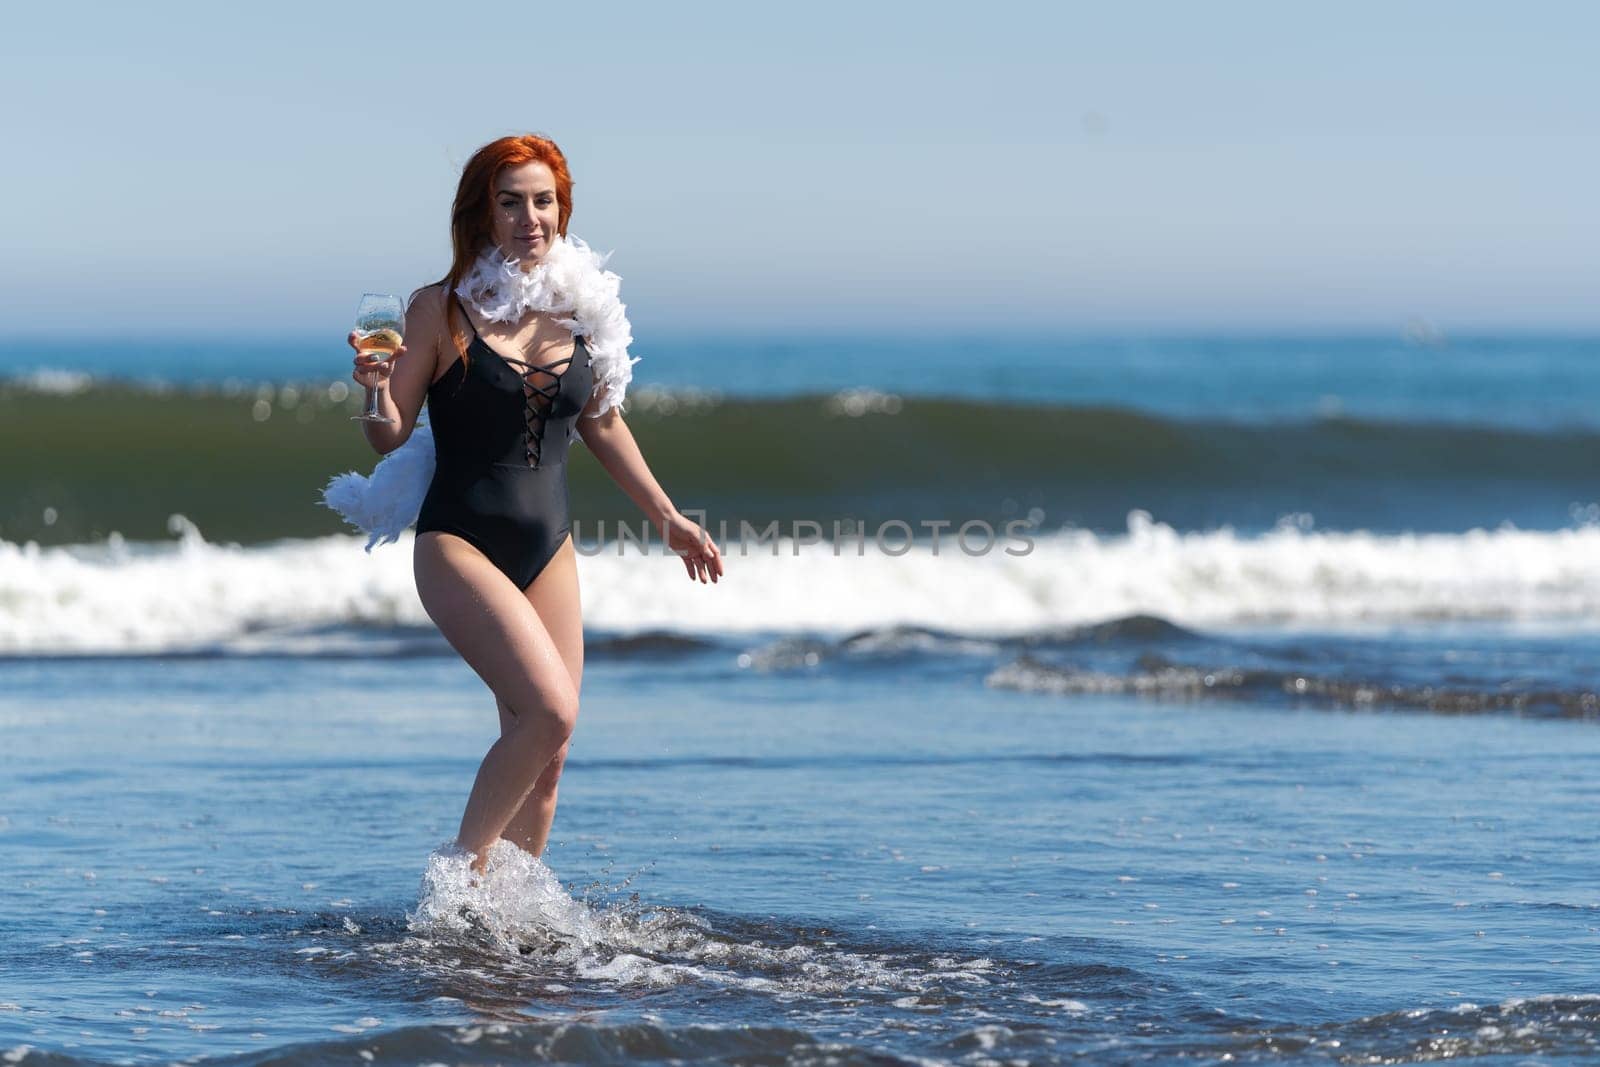 Smiling redhead woman in black swimsuit stands ankle deep in waves of ocean, holding glass of wine by Alexander-Piragis